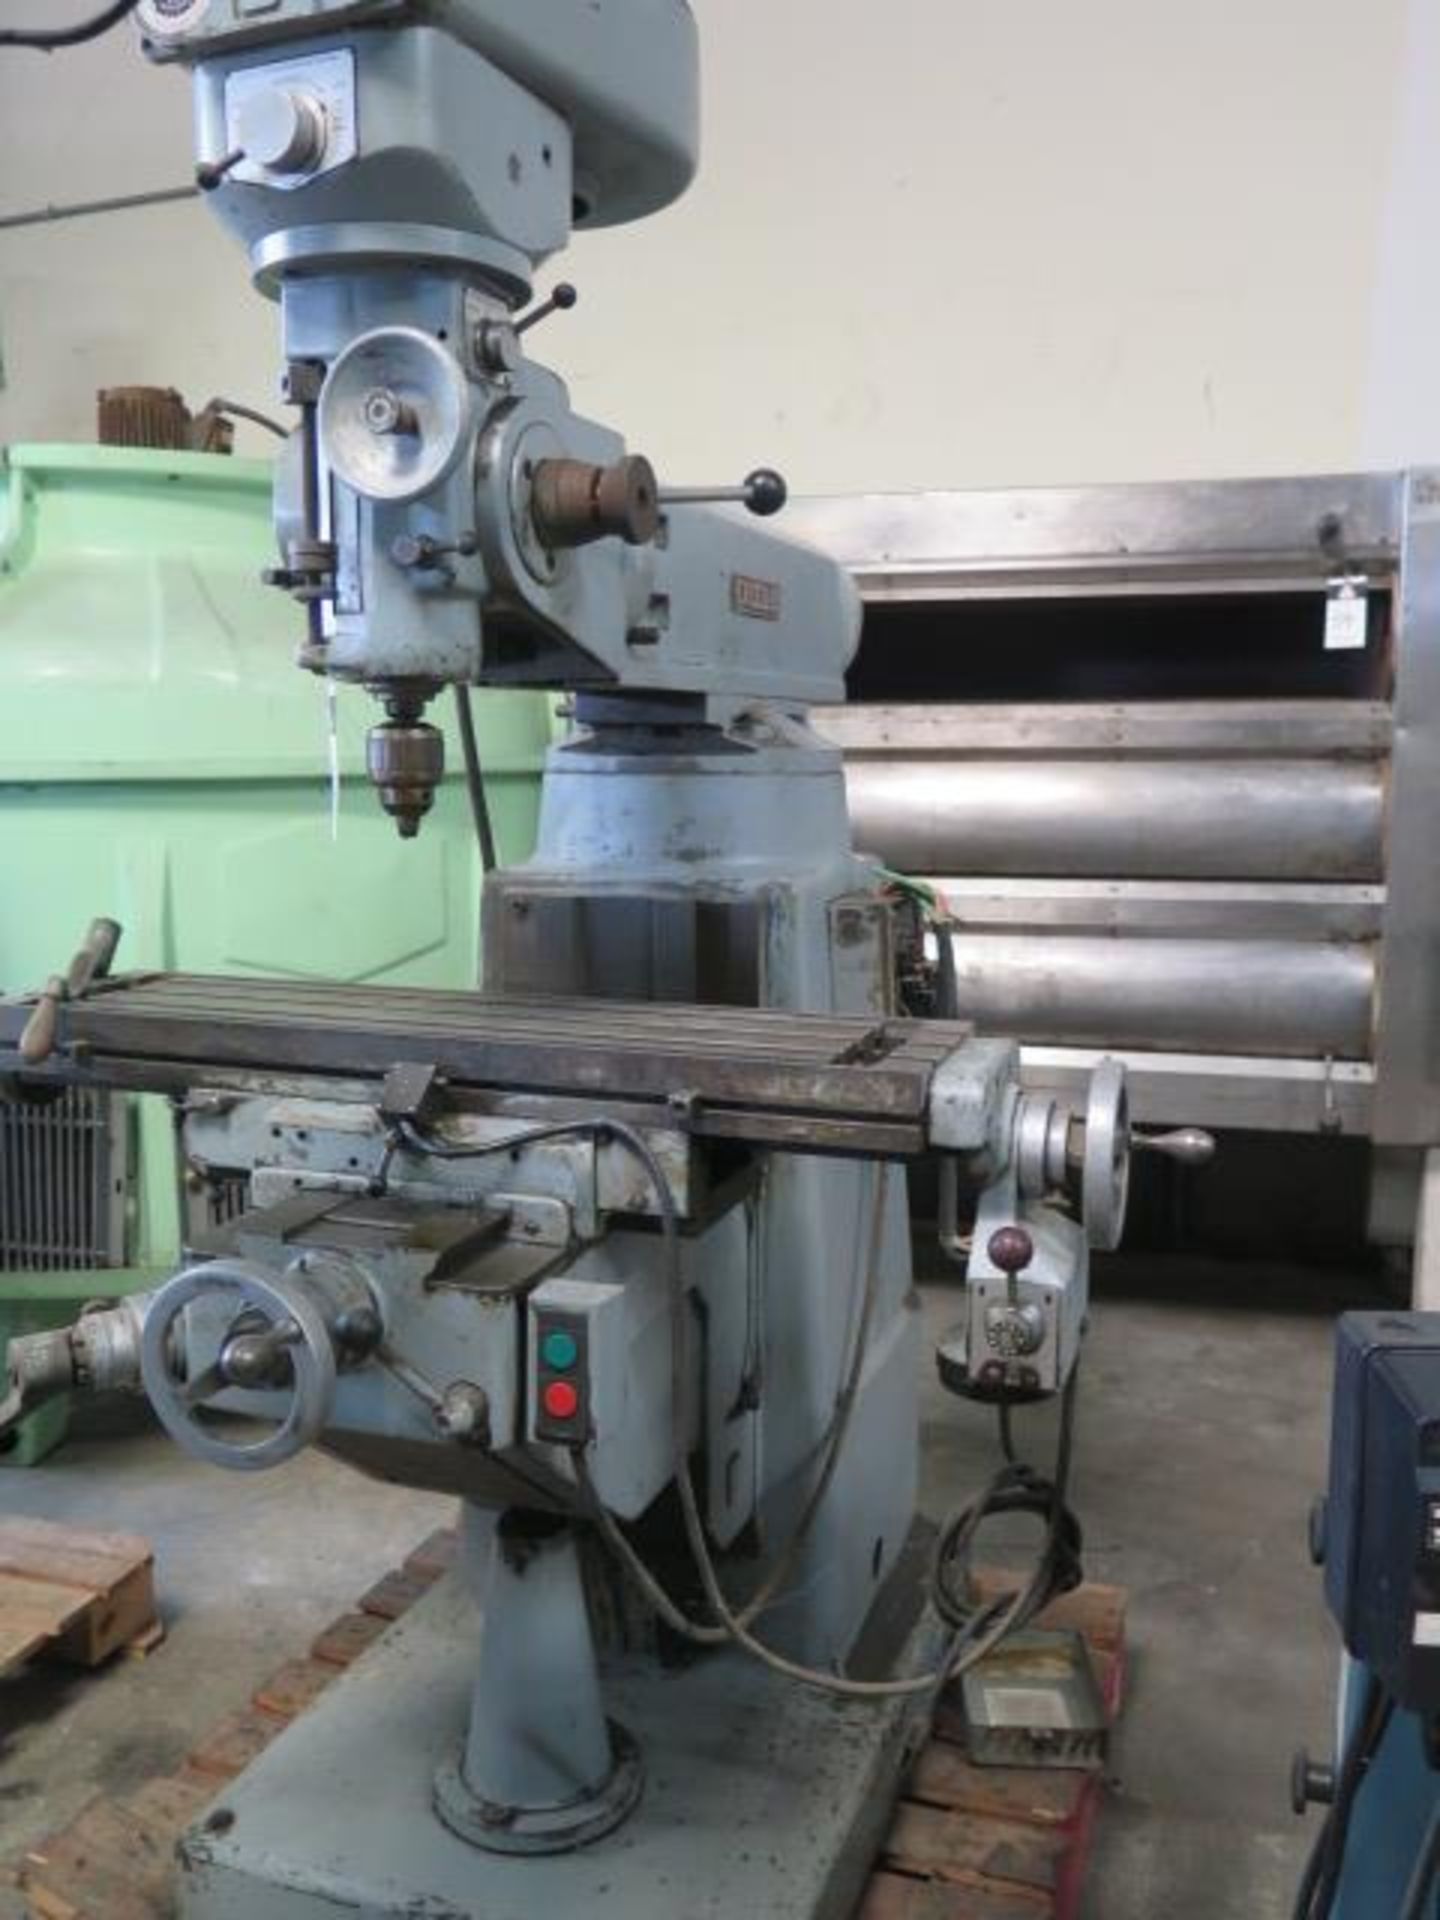 Ex-Cell-O Vertical Mill w/ 100-3800 Dial Change RPM, R8 SpdL, Power Feed, 9” x 36” Table, SOLD AS IS - Image 2 of 7